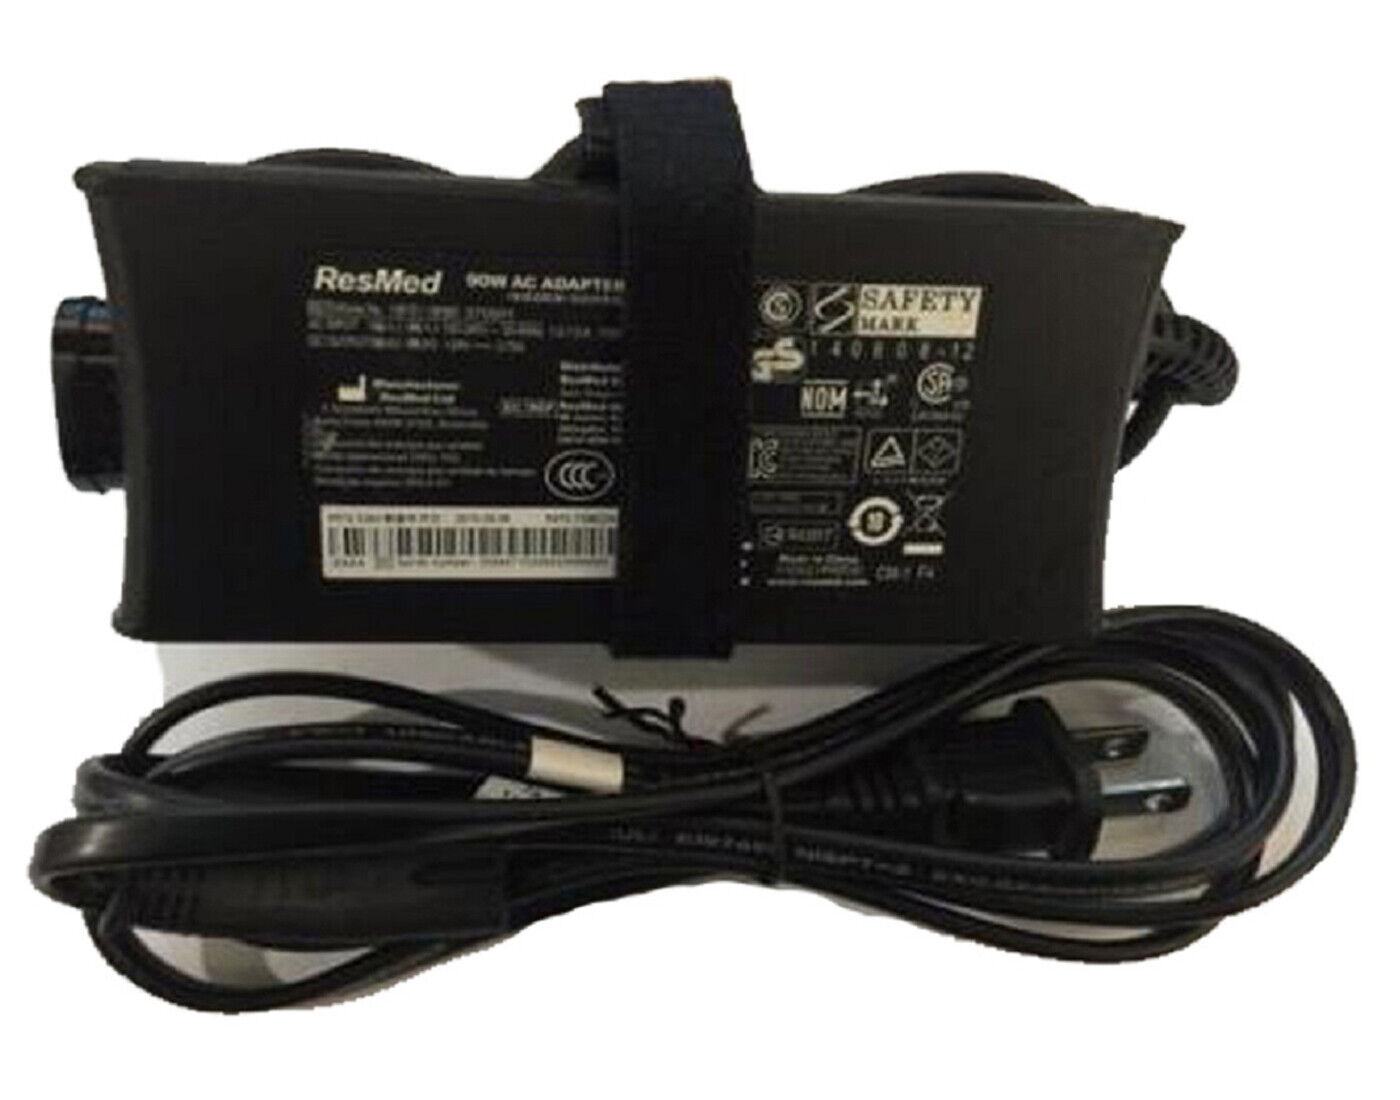 24V ResMed 370001 AC Adapter for ResMed AirSense S10 CPAP Machine Power Supply Brand ResMed Type AC/Standard Color Blac